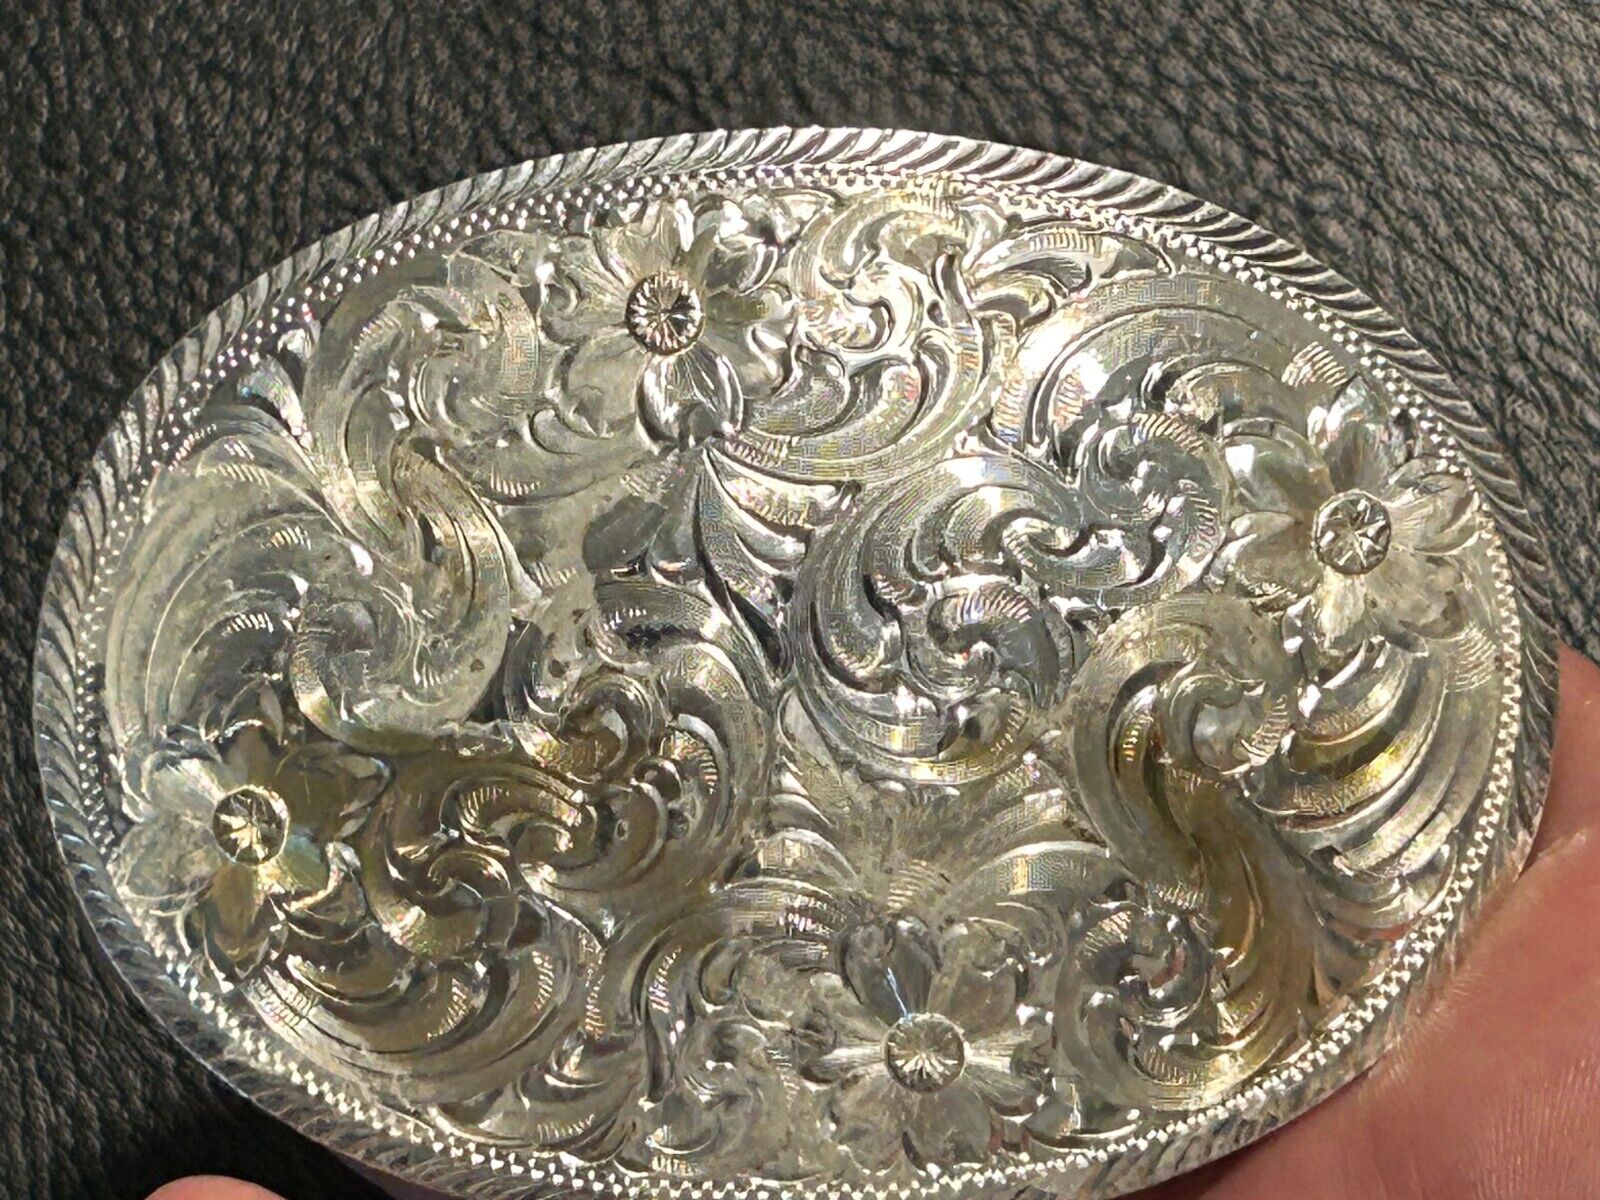 Preowned MONTANA SILVERSMITHS CLASSIC WESTERN OVAL BELT BUCKLE